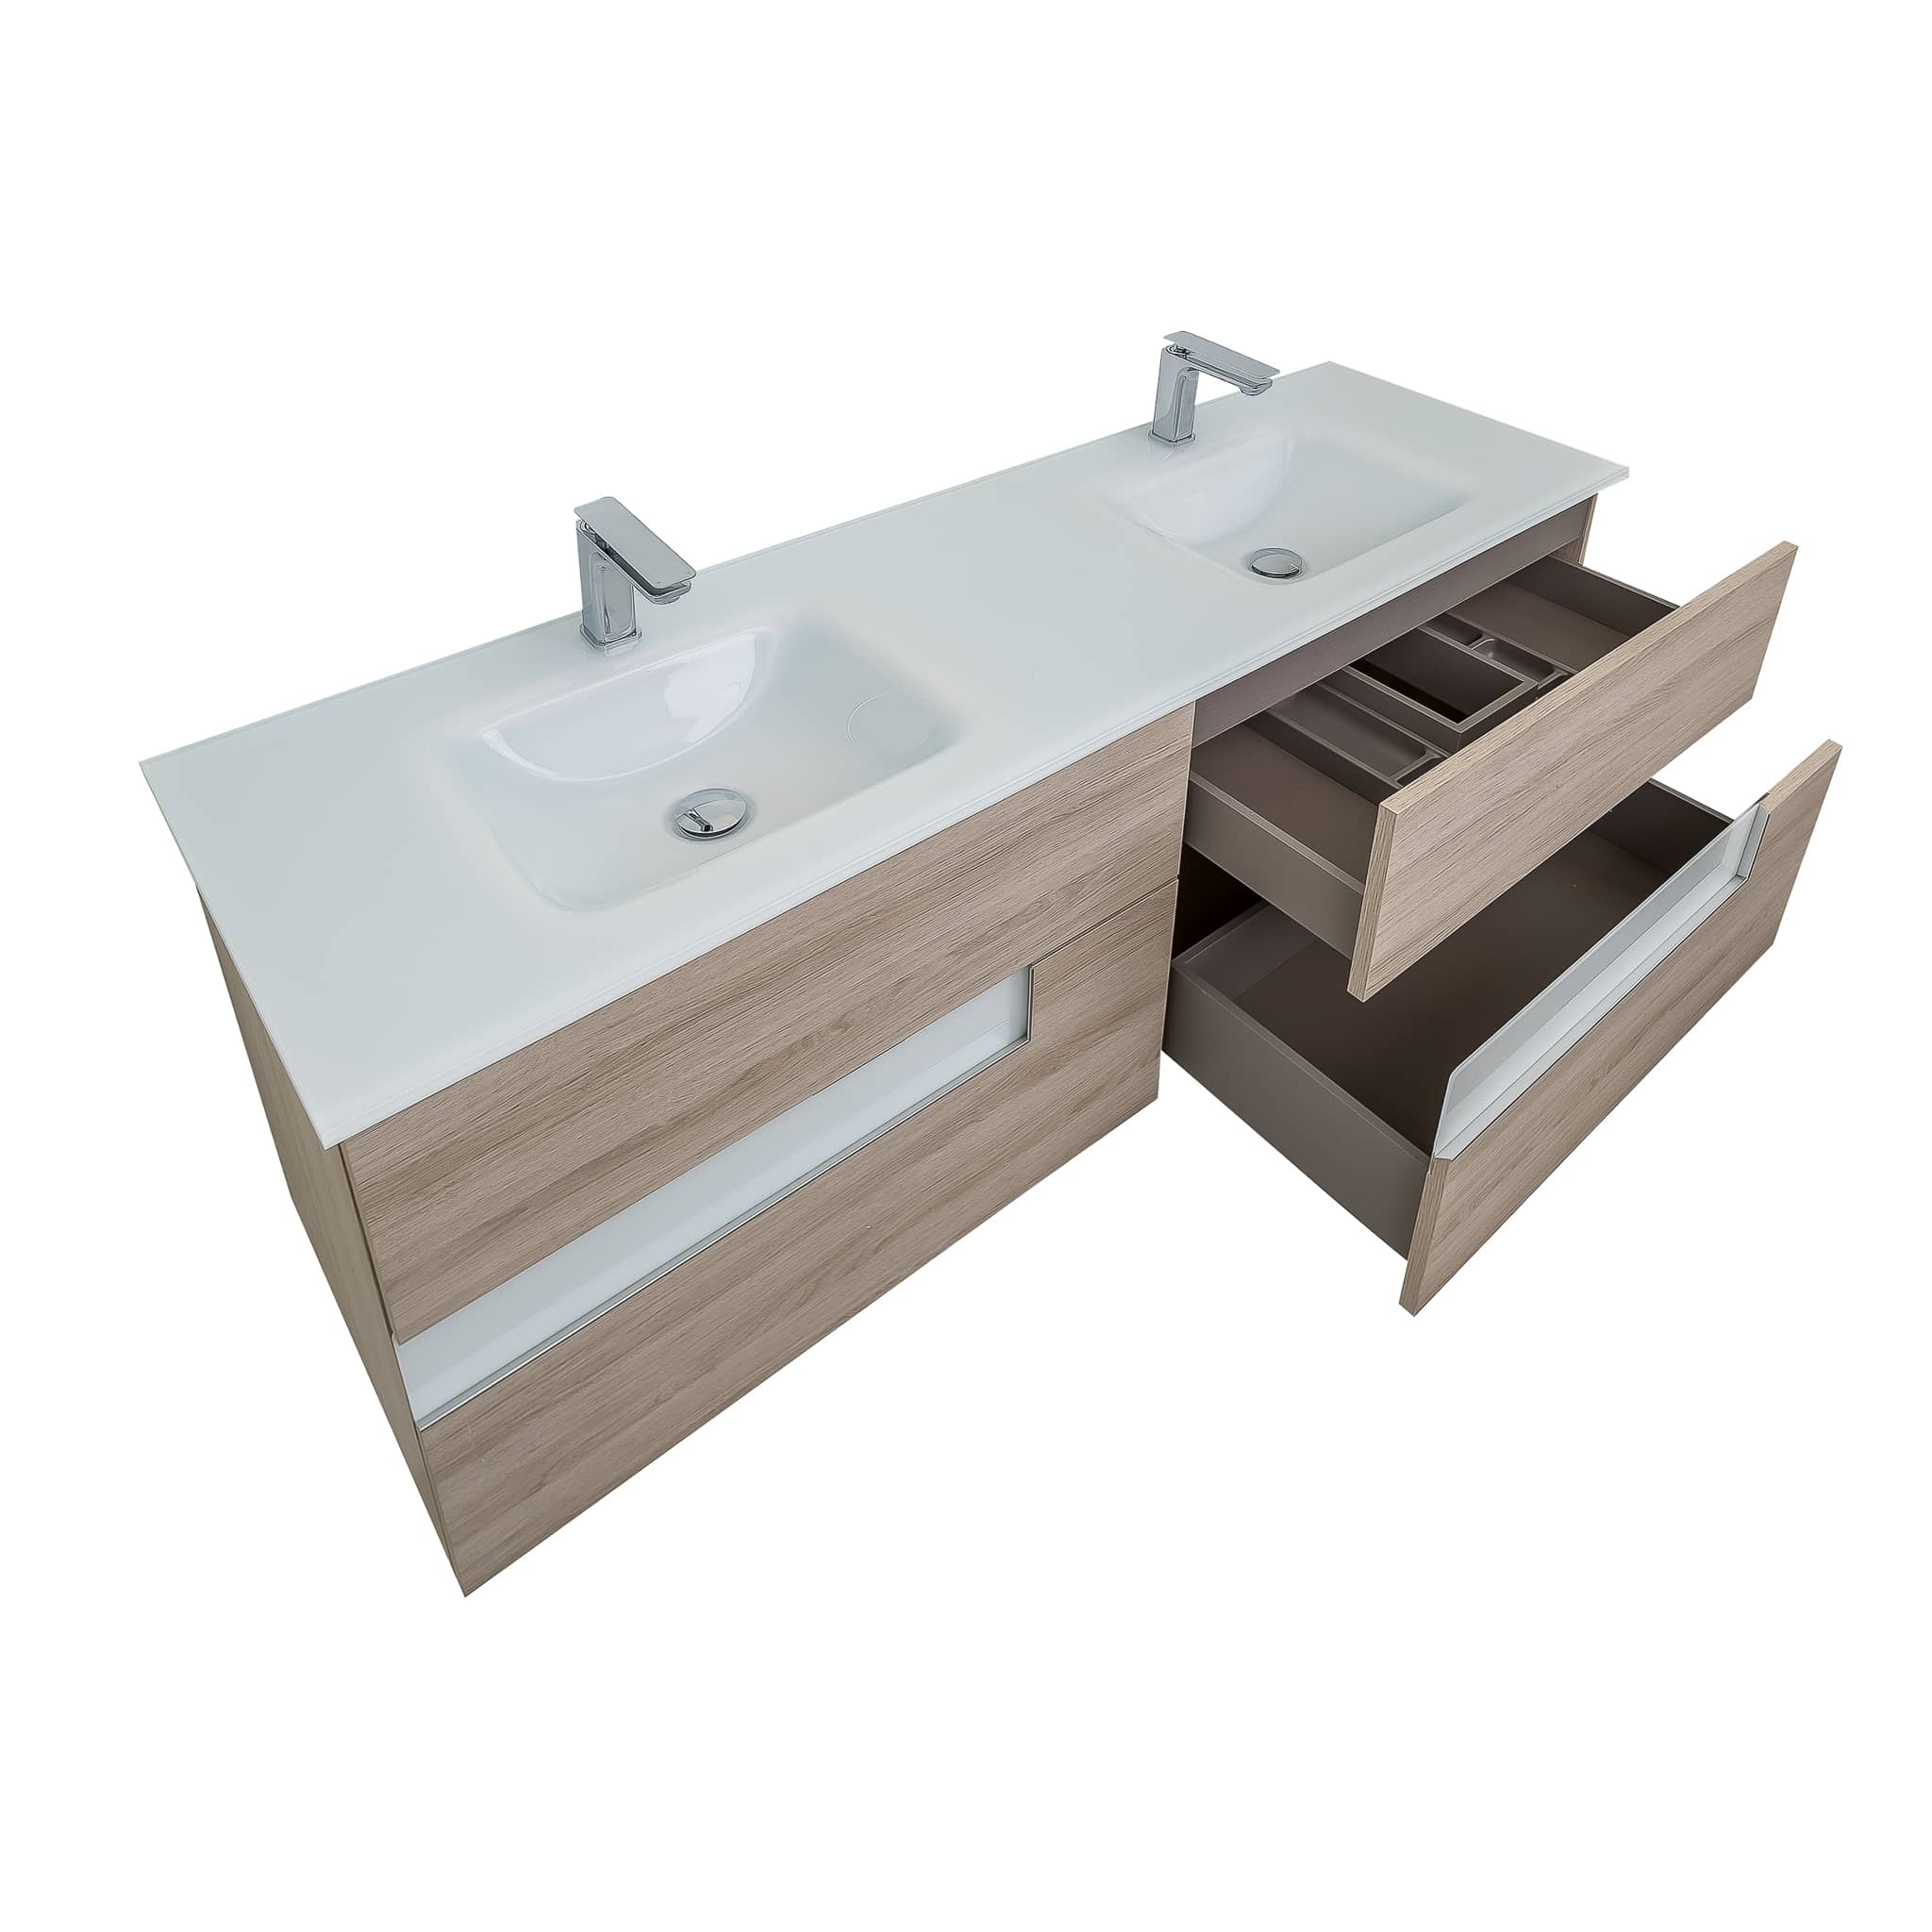 Aquamoon Vision 62.5" Double Sink Wall Mounted Vanity Set Natural w/LED mirror w/glass sink